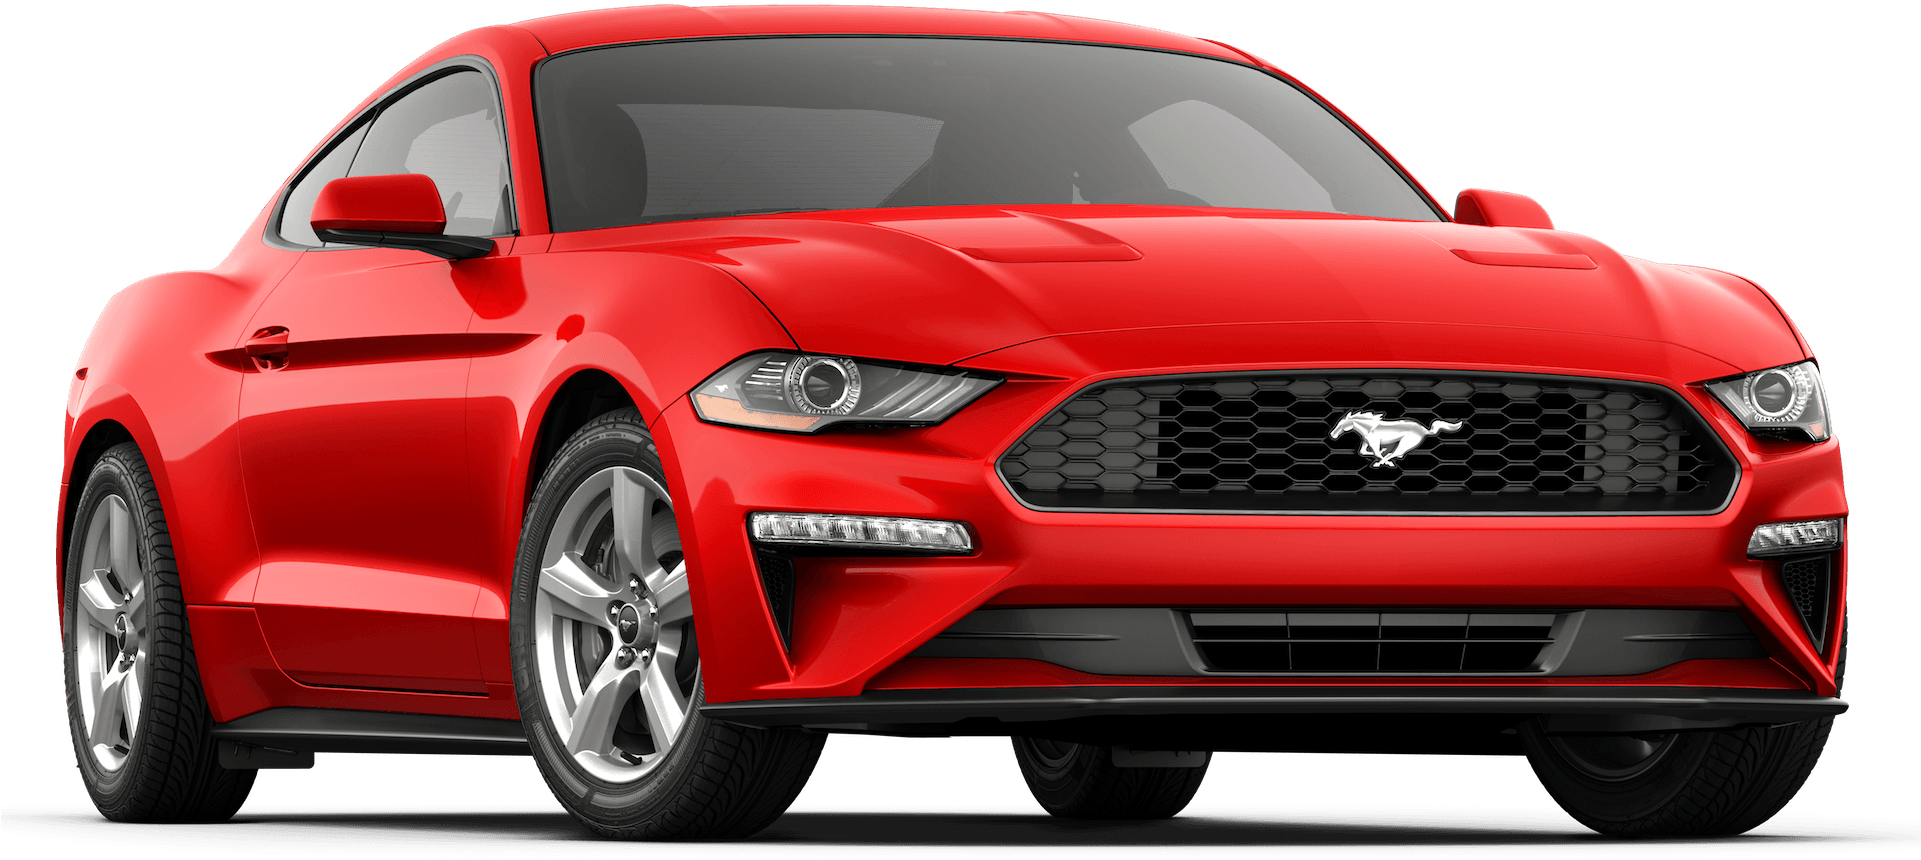 Ford Mustang 2018 PNG HD Quality